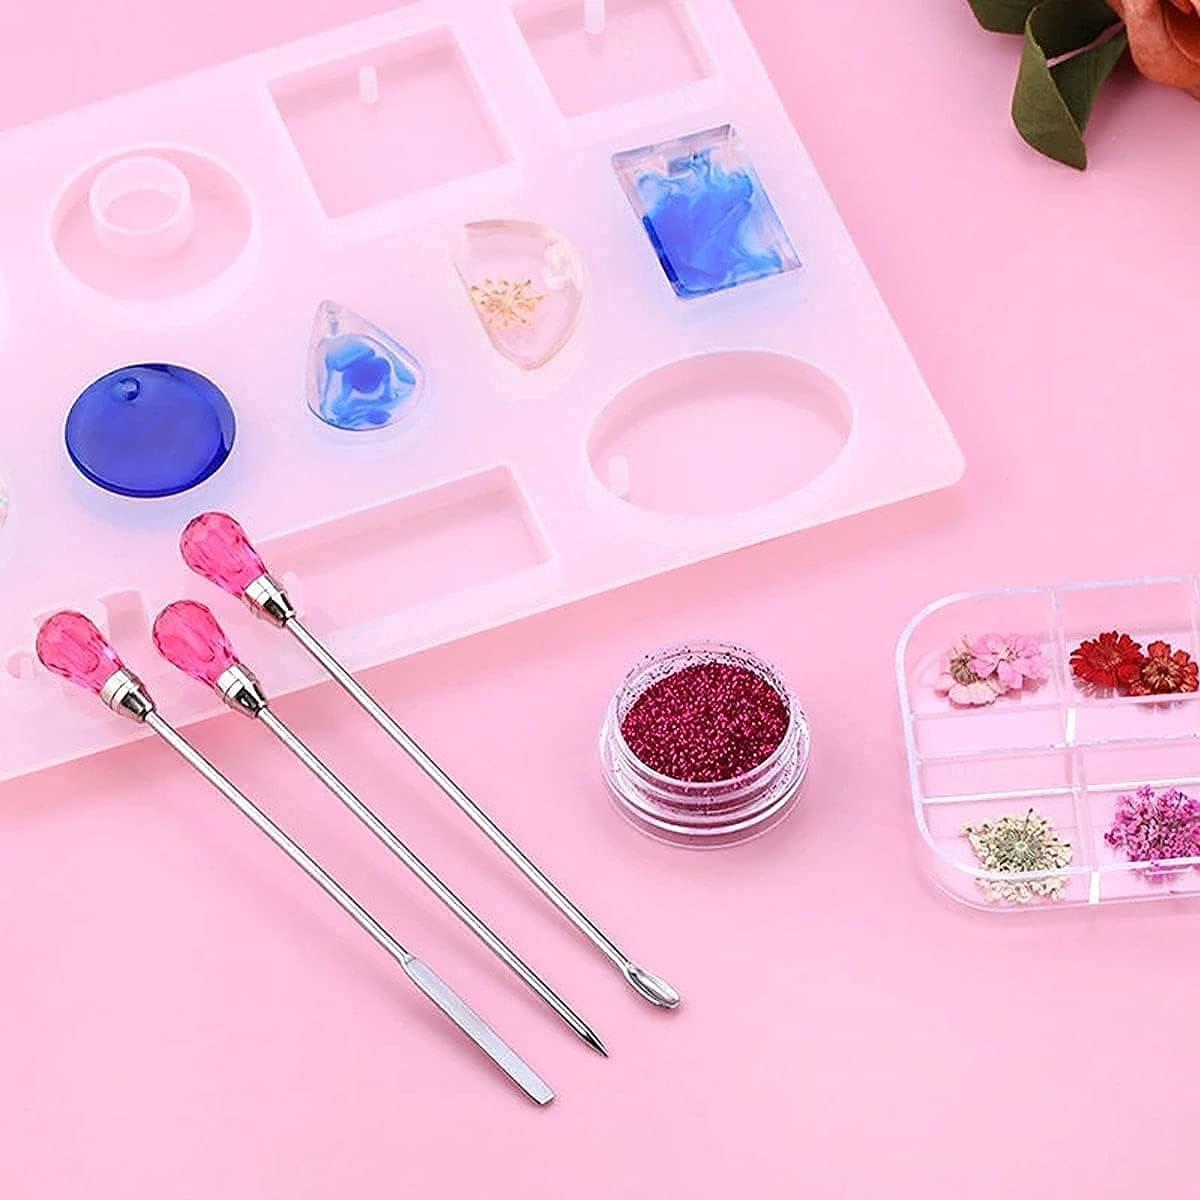 JF070 DIY Epoxy Resin Casting Jewelry Making Tools Kit Silicone Mat  Electronic Scale Measure Cup Dropper Stirring Stick Tweezers